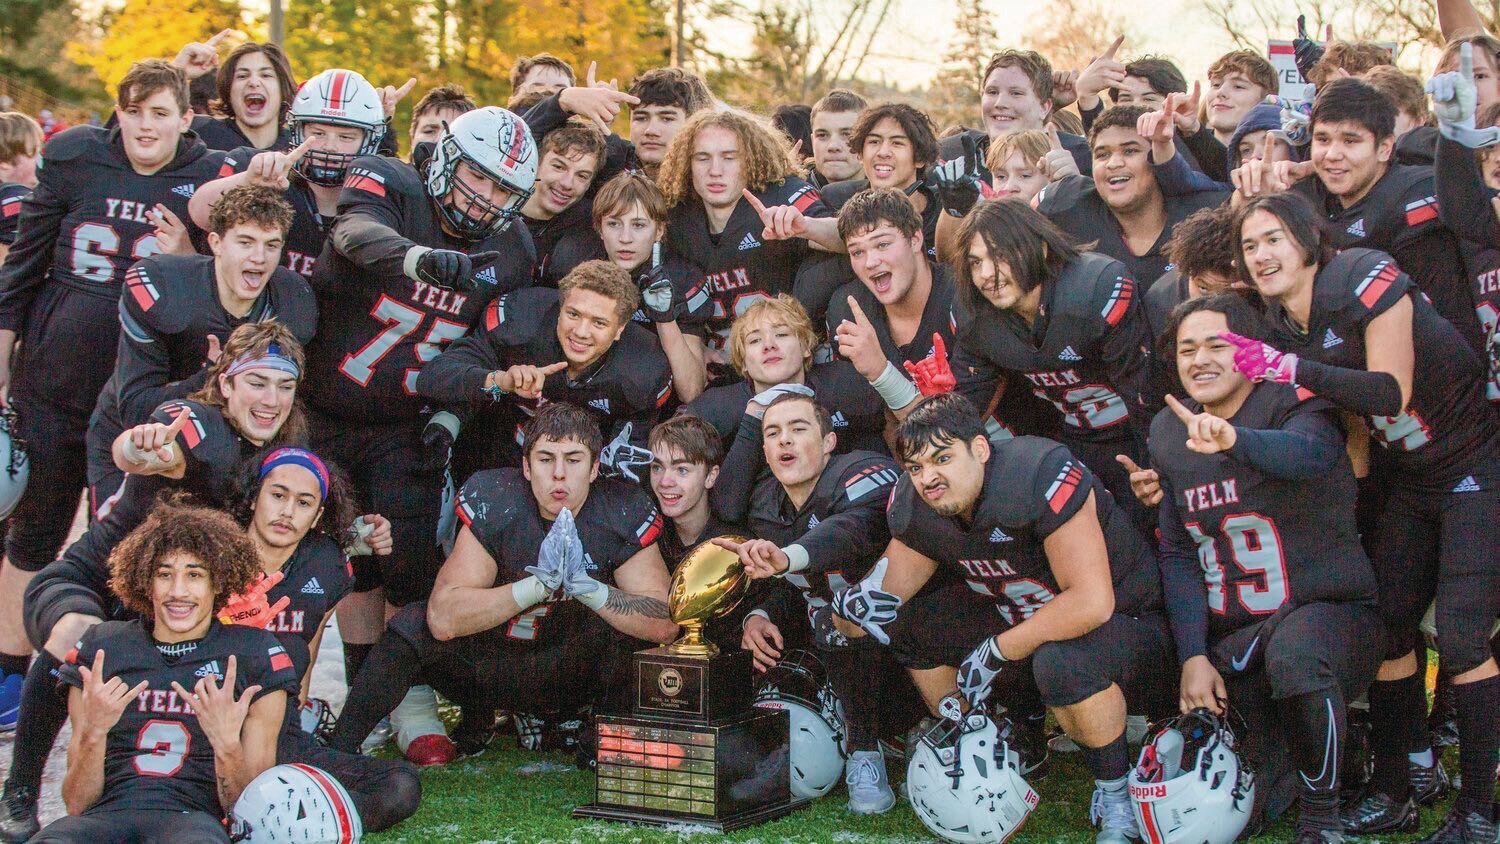 Proceeds from the Yelm football fundraiser will directly benefit the Yelm High School football players.